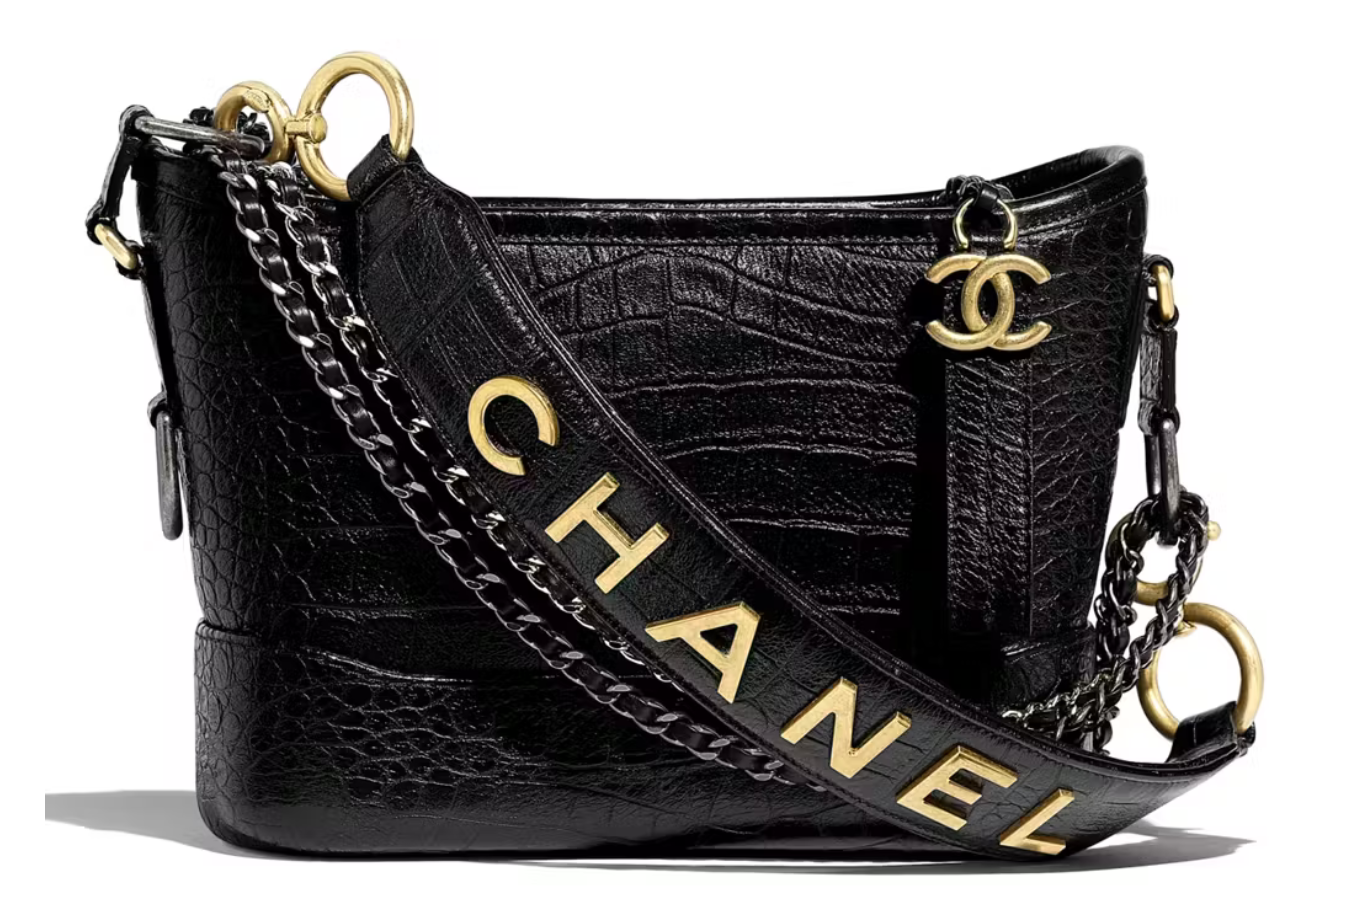 Buy Pre-owned & Brand new Luxury Chanel Gabrielle Small Hobo Bag Online